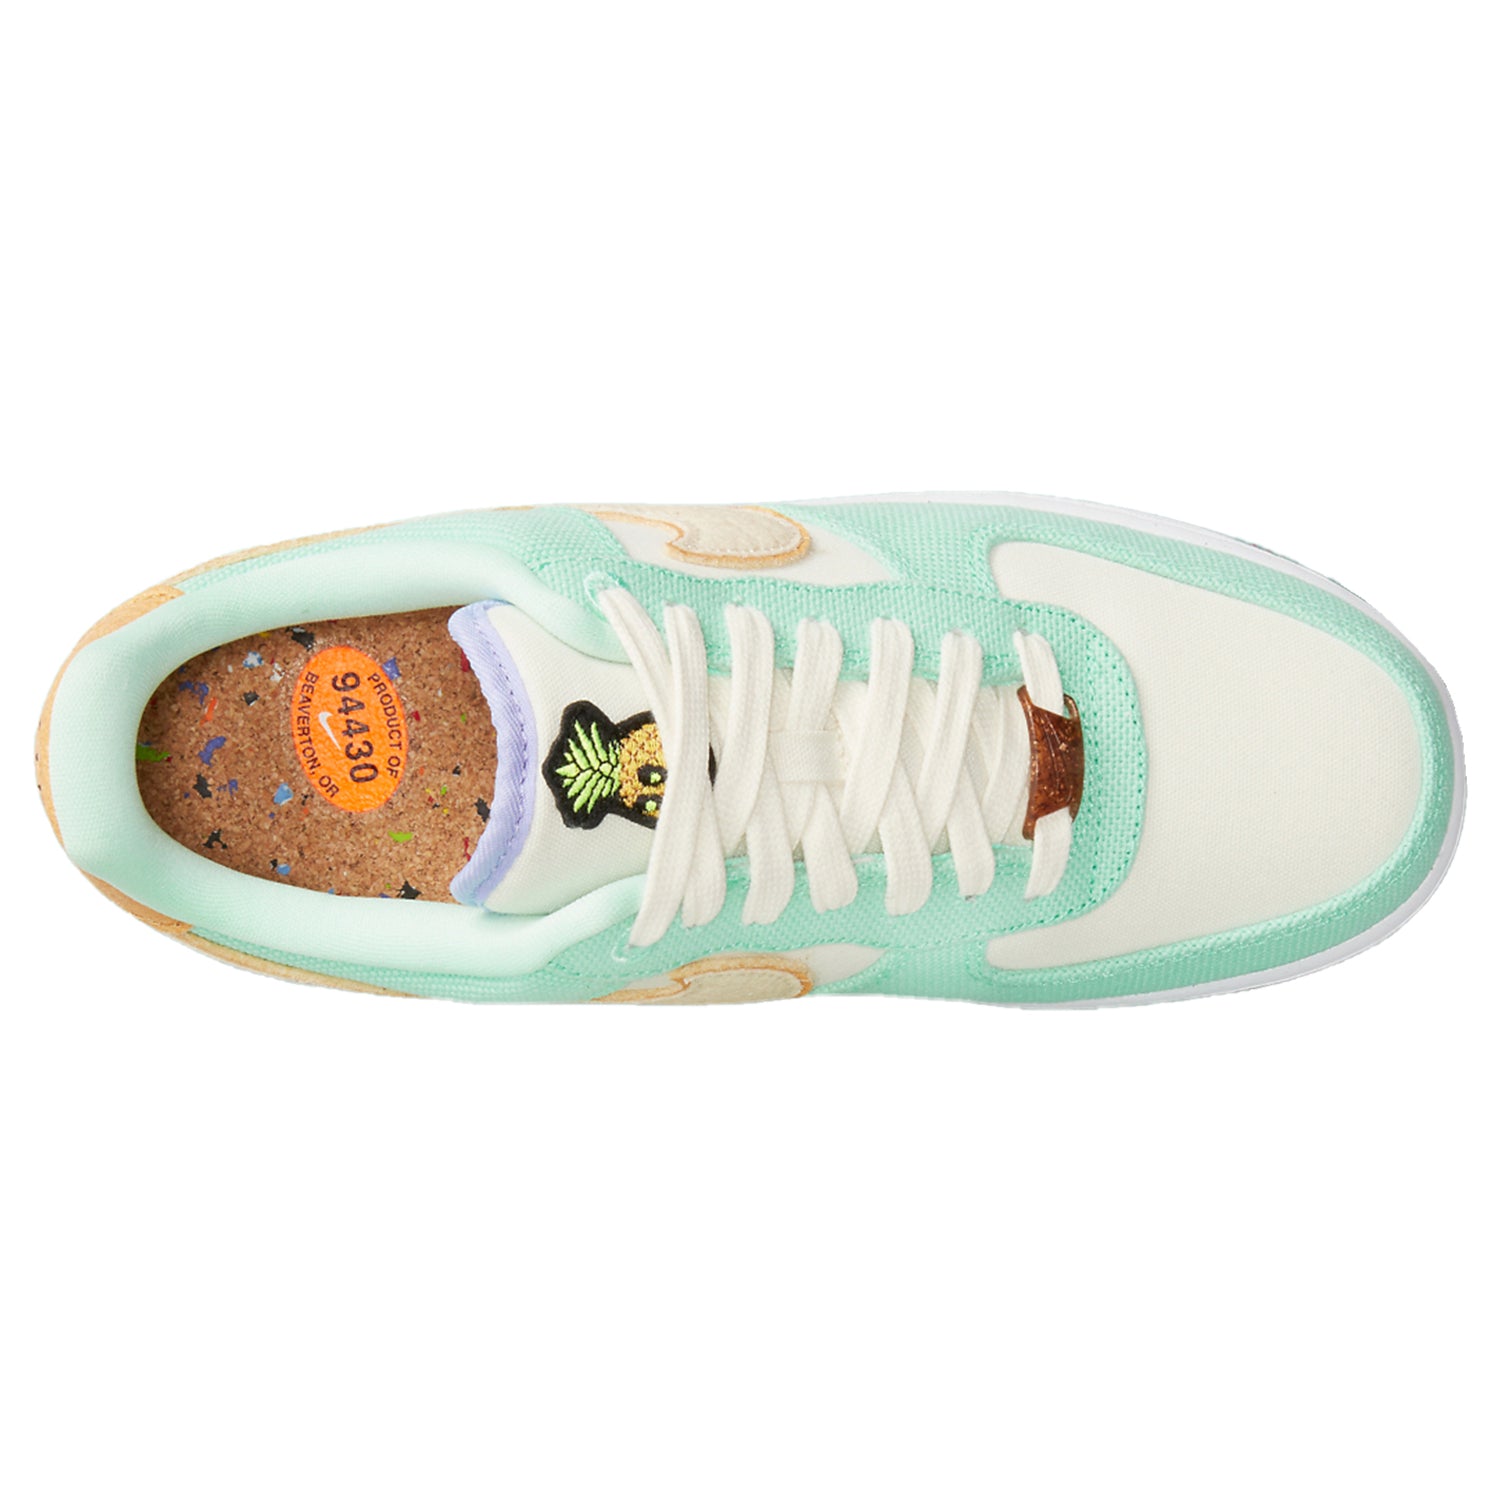 WMNS AIR FORCE 1 '07 LX 'HAPPY PINEAPPLE'